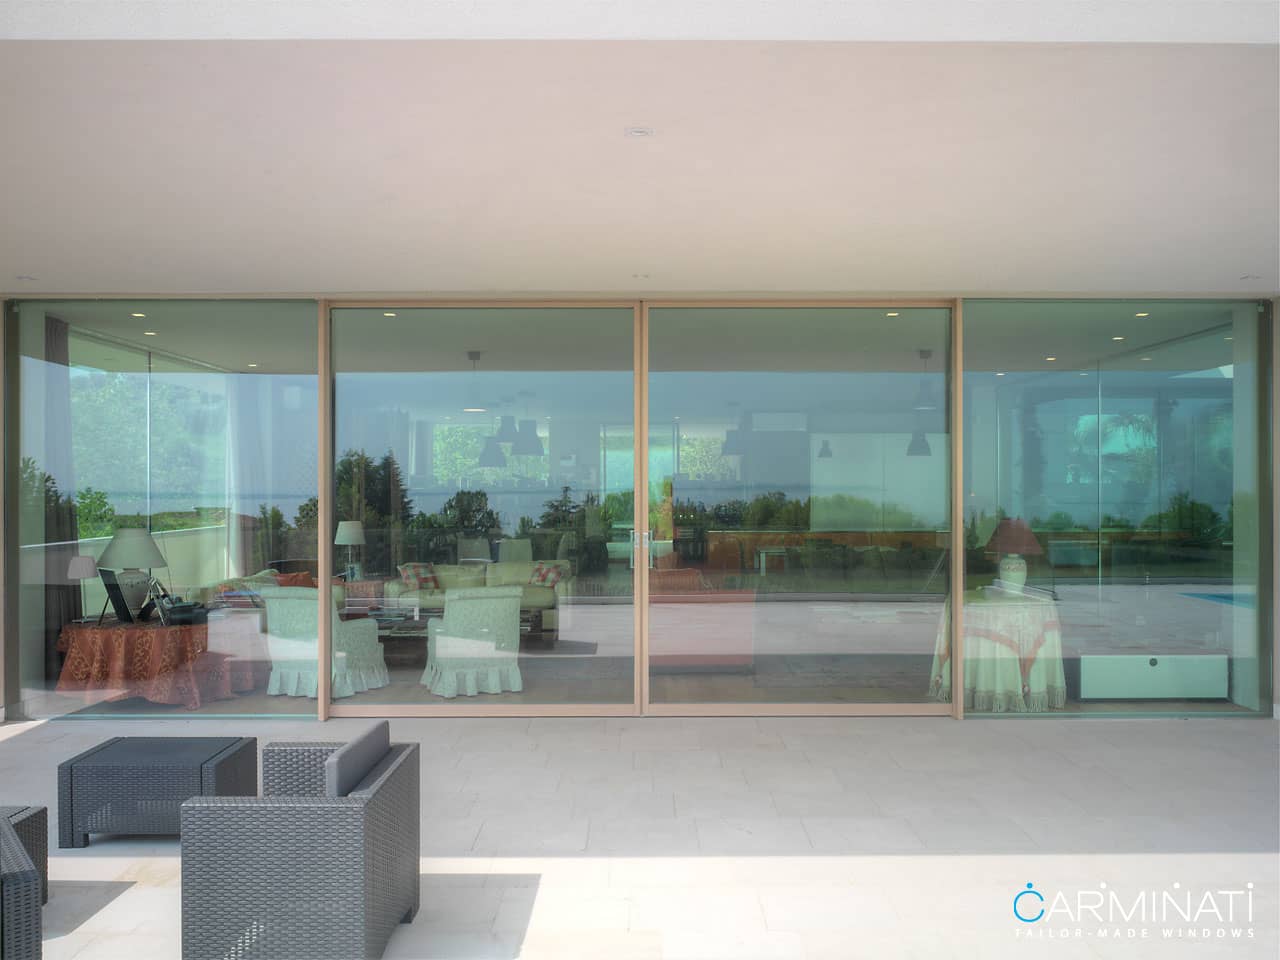 A minimal frame lift slide door system by Carminati opens this villa to the beautiful views of Saint Tropez